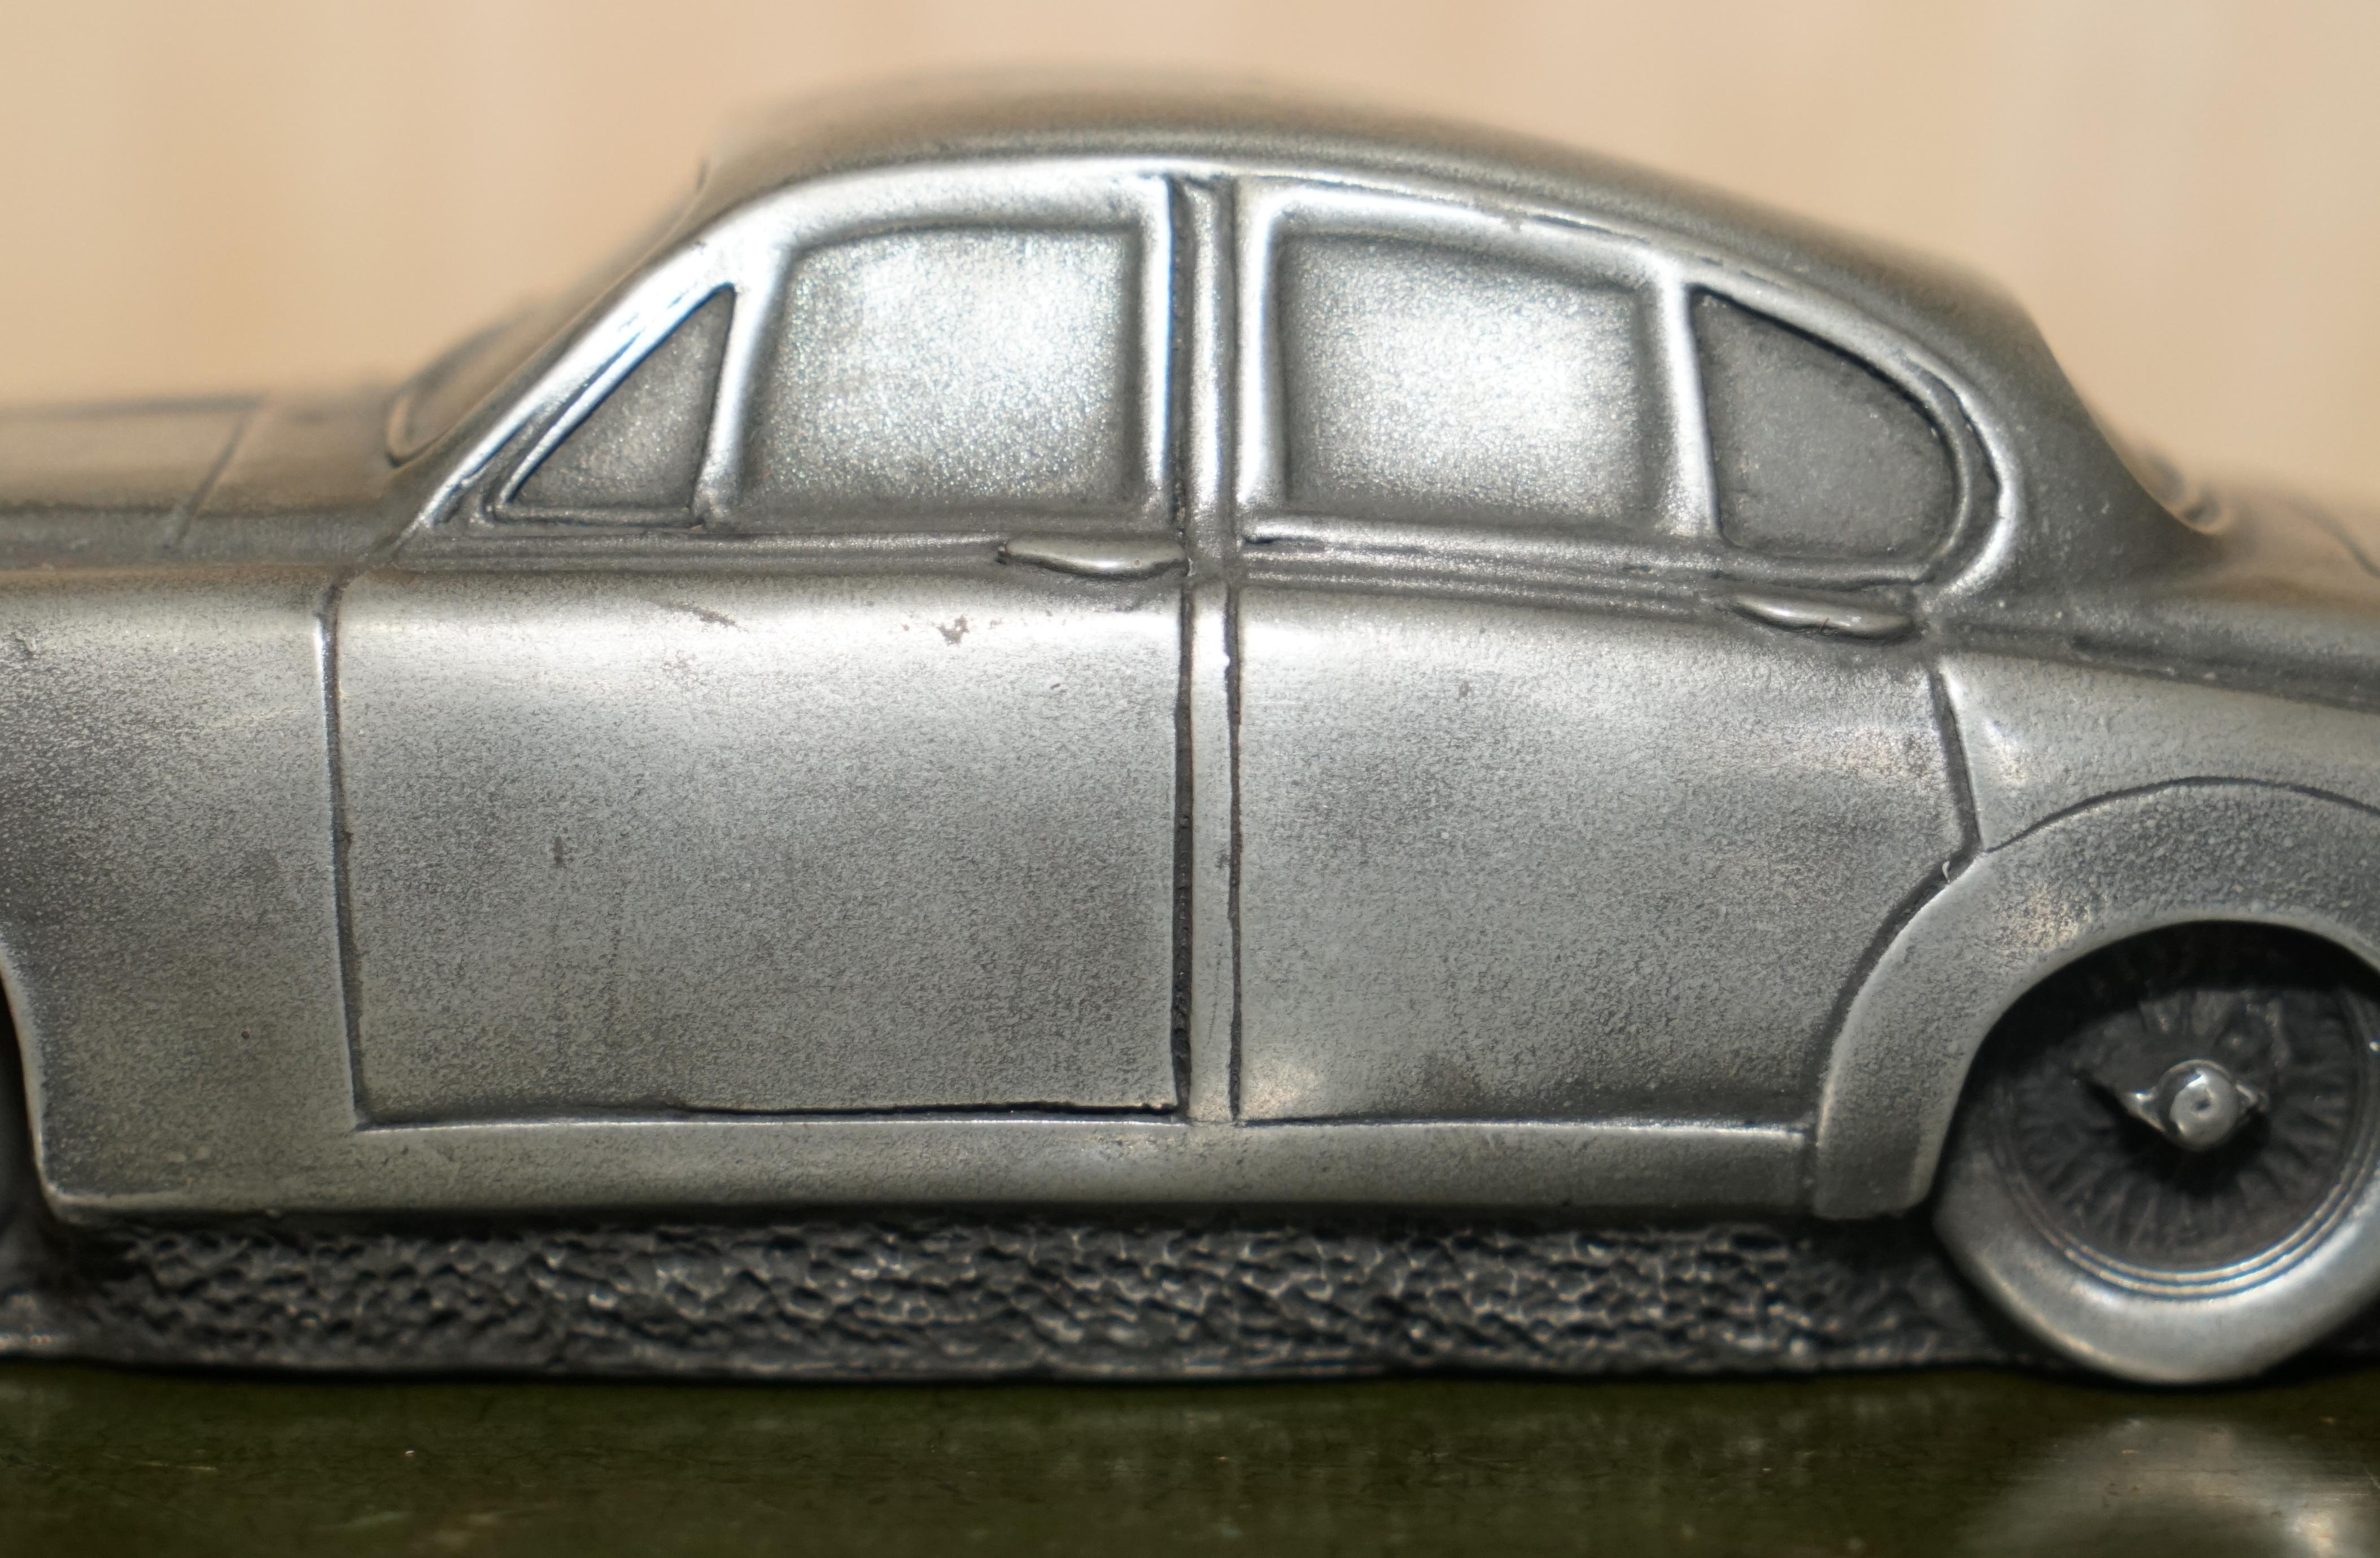 Compulsion Gallery Pewter Jaguar 1955-1959 Edition Mark i Car Must See Pictures For Sale 1